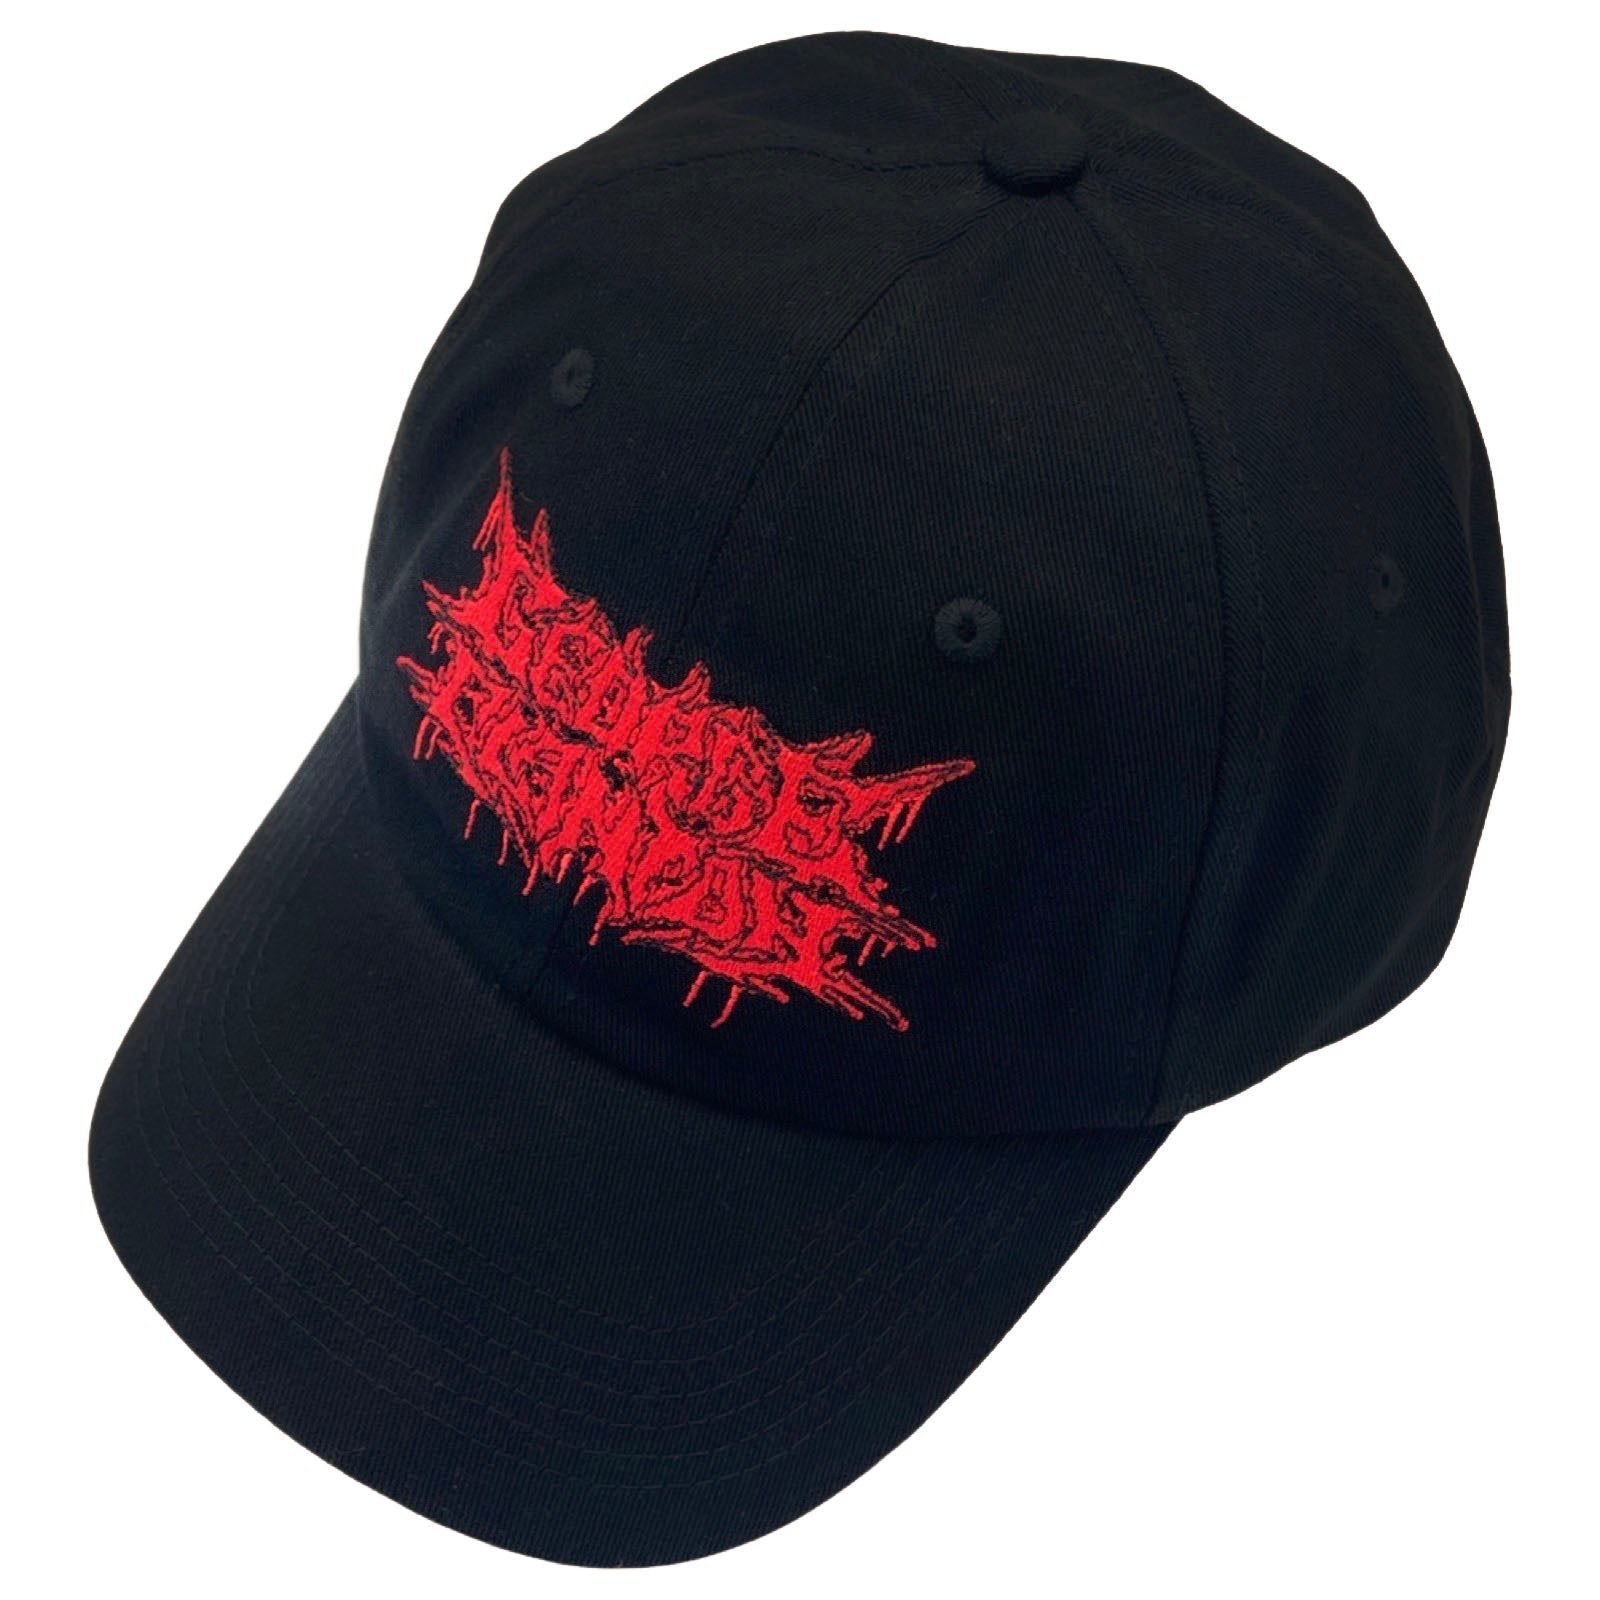 George Clanton - Death Metal Cap - 100% Electronica Official Store (Photo 1)